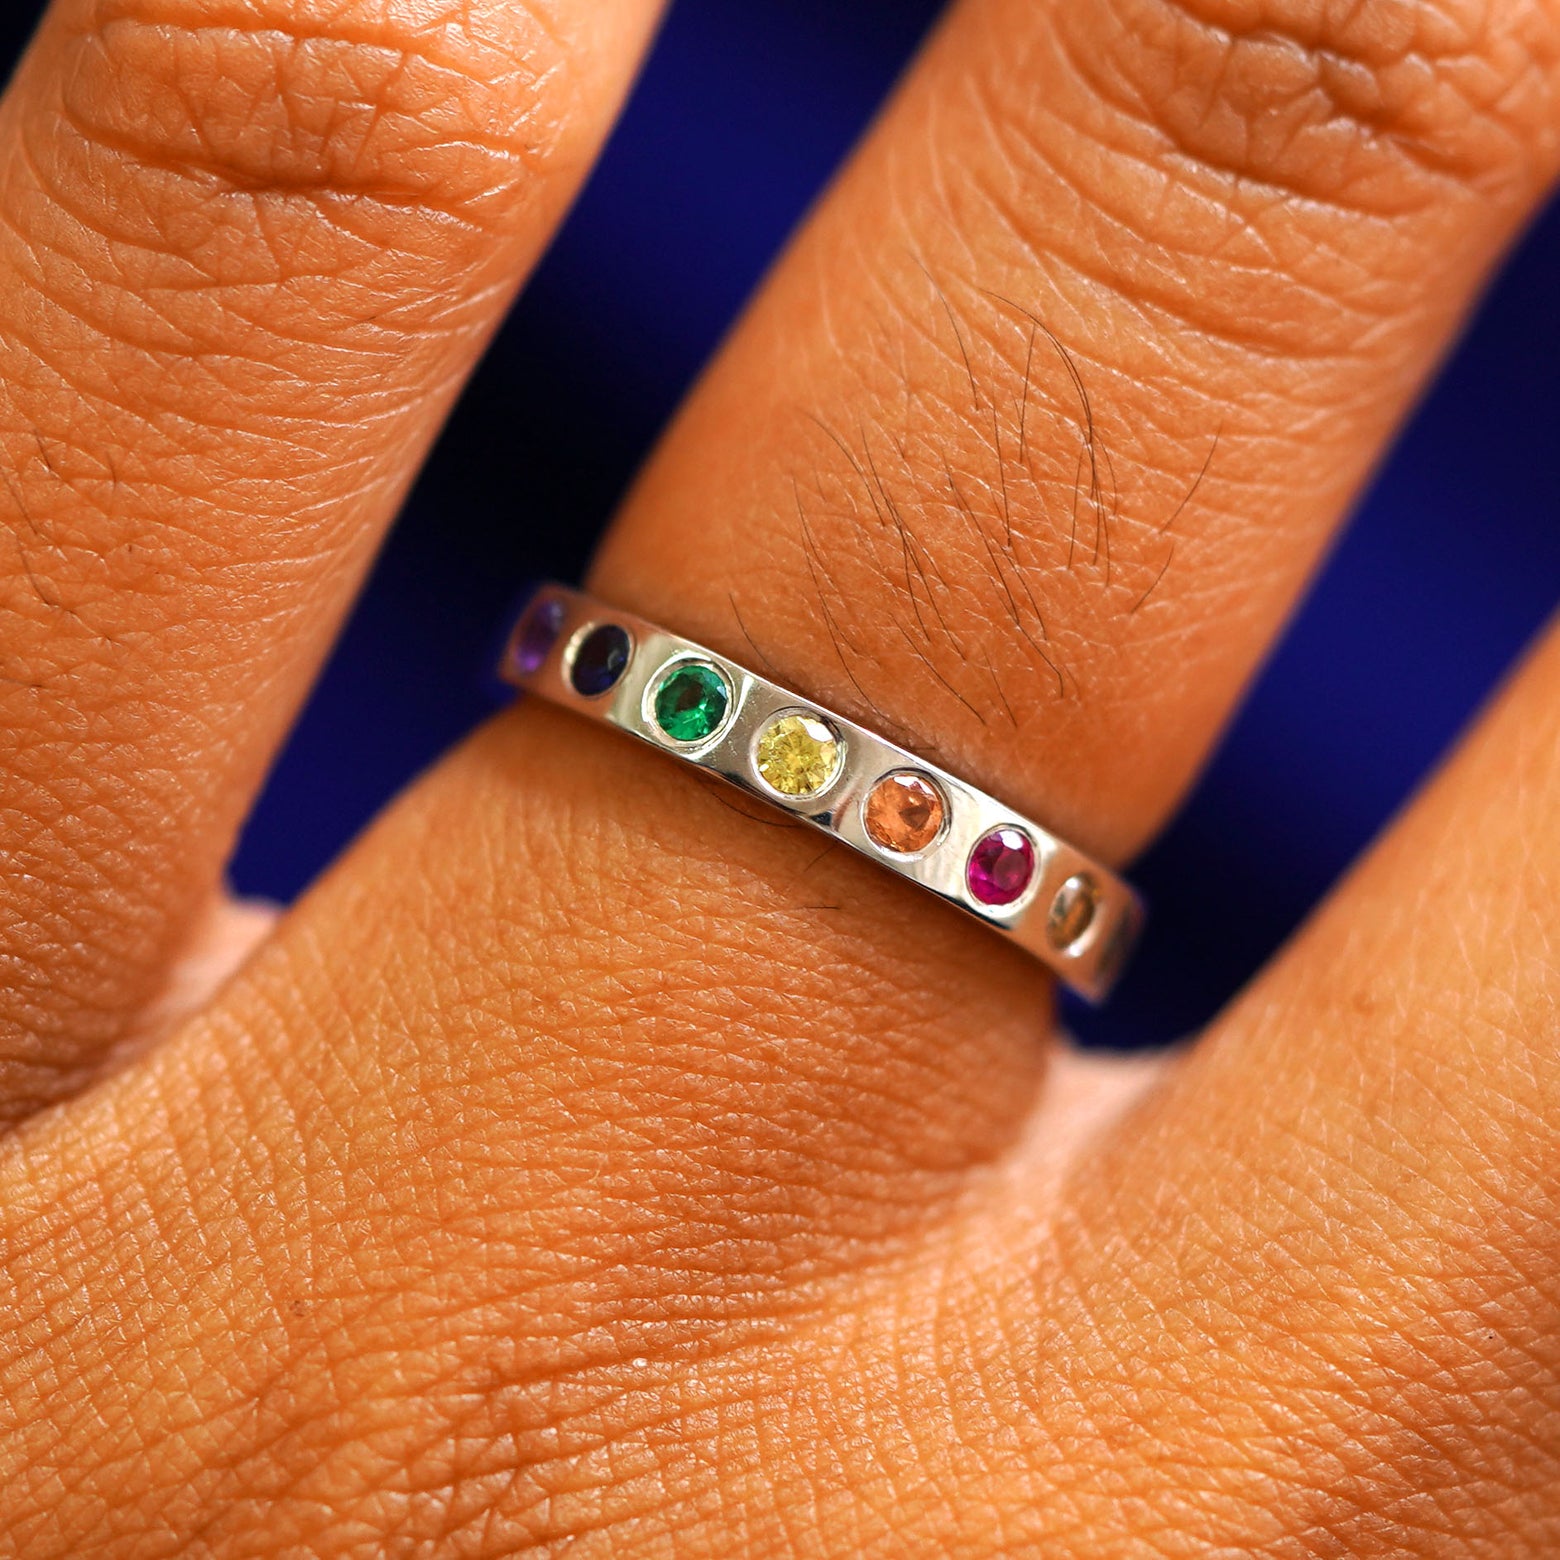 A 14k solid gold ring with an emerald, ruby, champagne and black diamonds, and sapphires of multiple colors in rainbow order